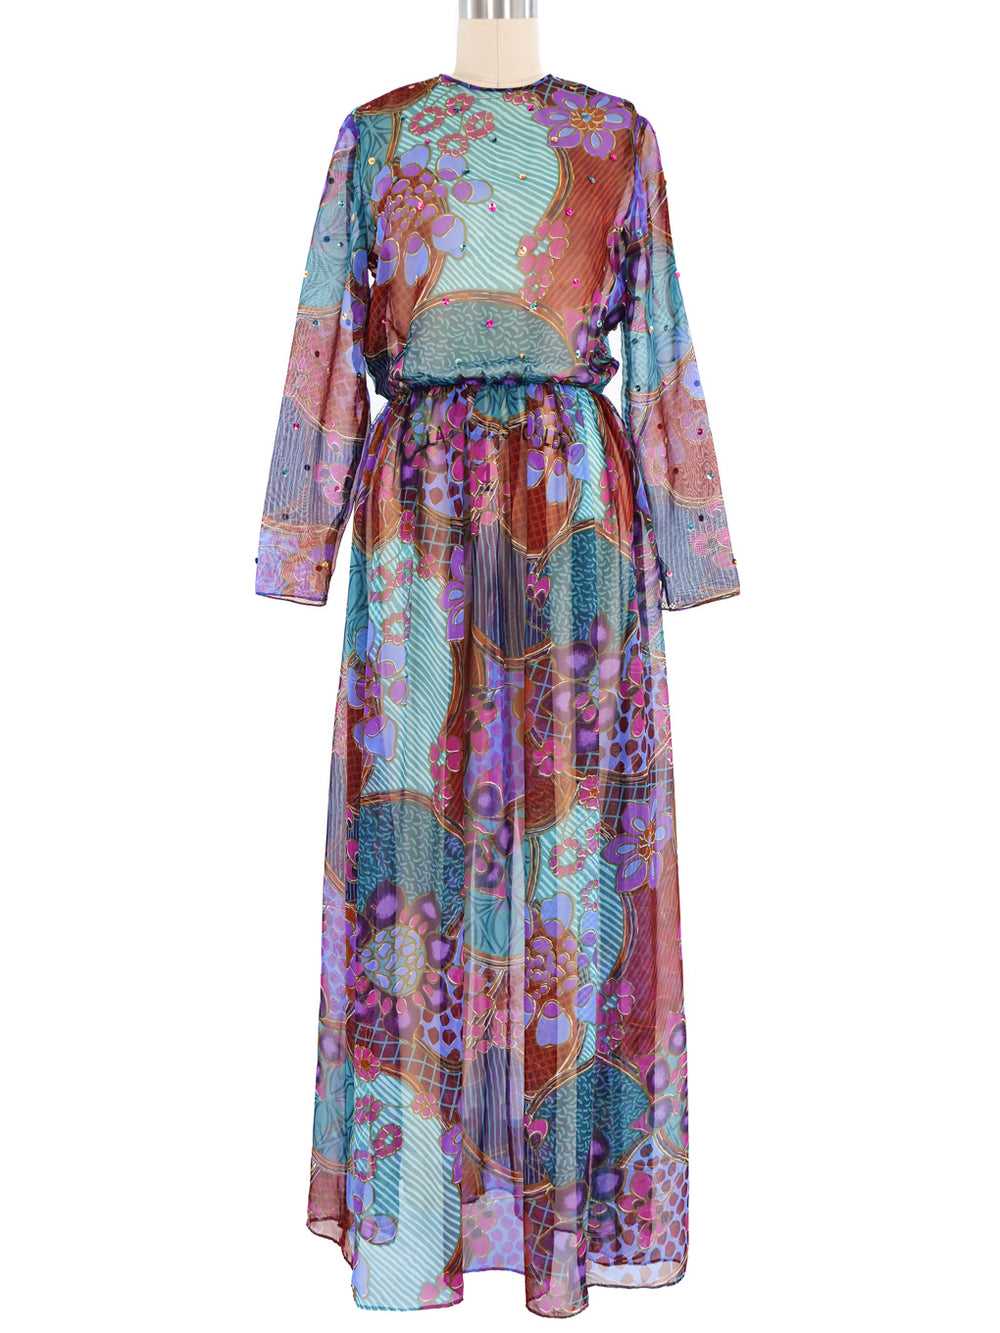 Sequined Floral Print Sheer Maxi Dress - image 1